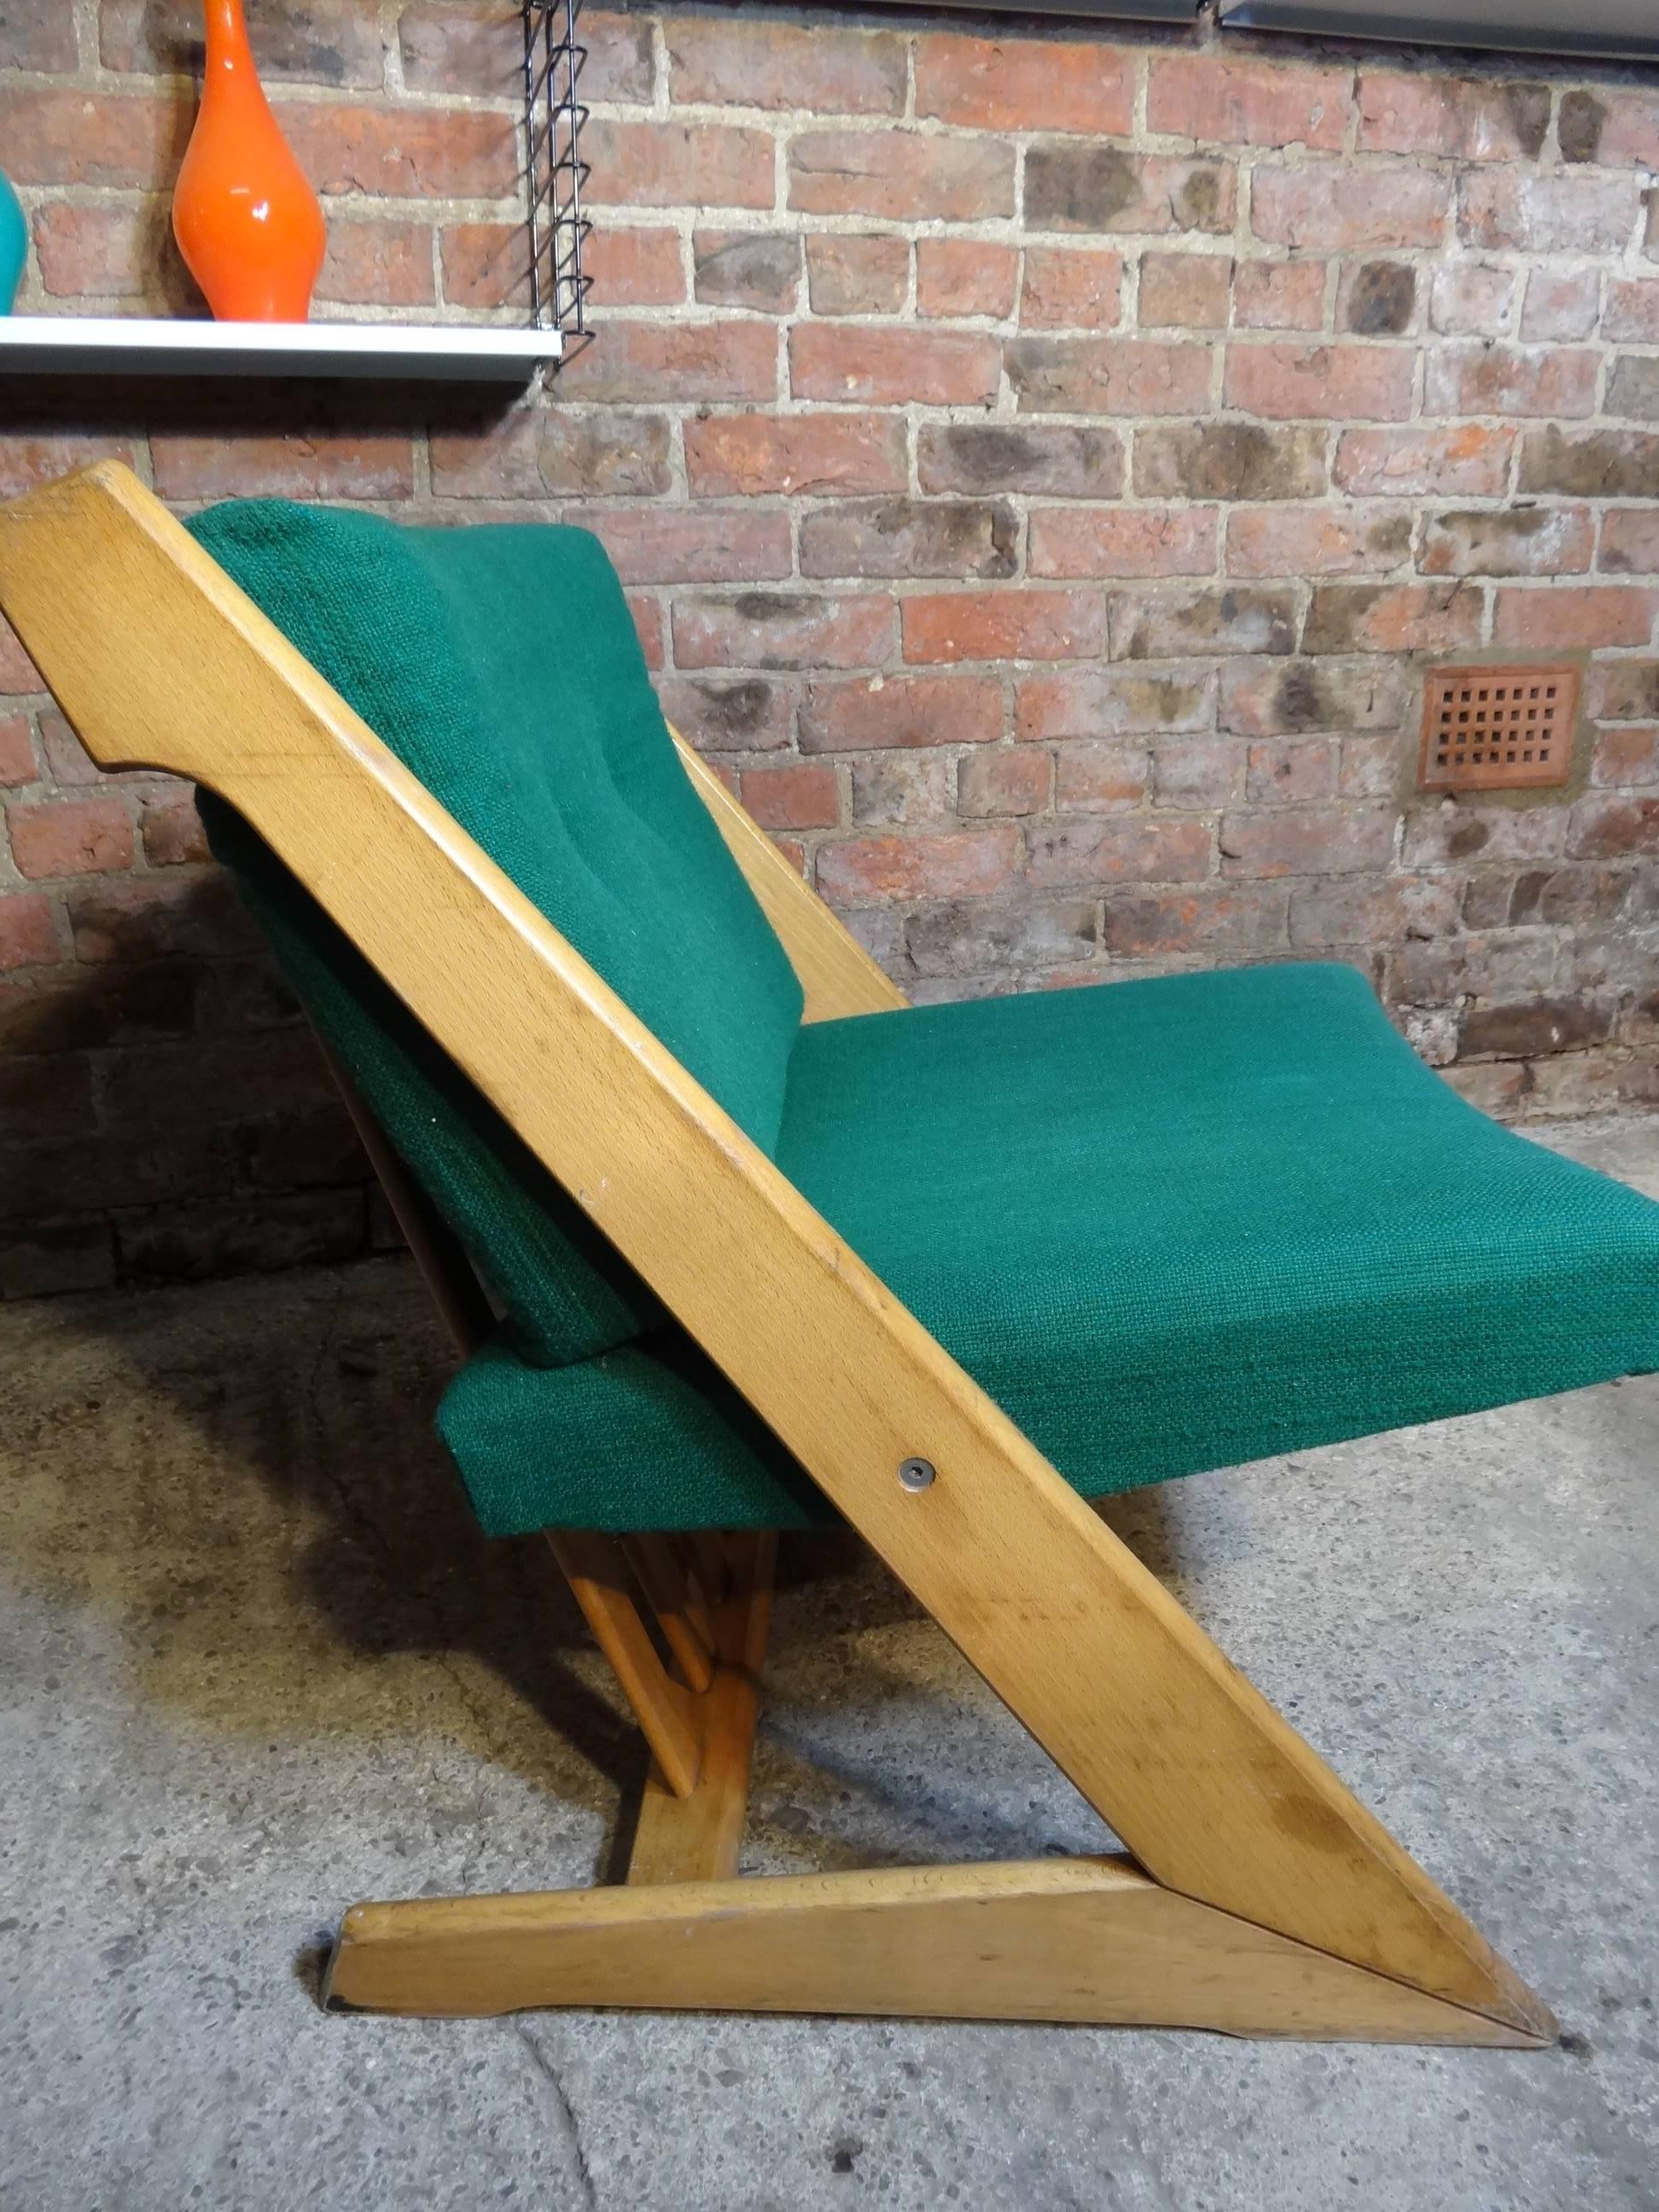 This solid Danish Z shaped framed chair comes with green fabric cushions, this classic Danish chair are the antiques of the future and look great in any decor.
Measures:
Seat height: 42 cm, height: 75 cm, depth: 70 cm, width: 62 cm.